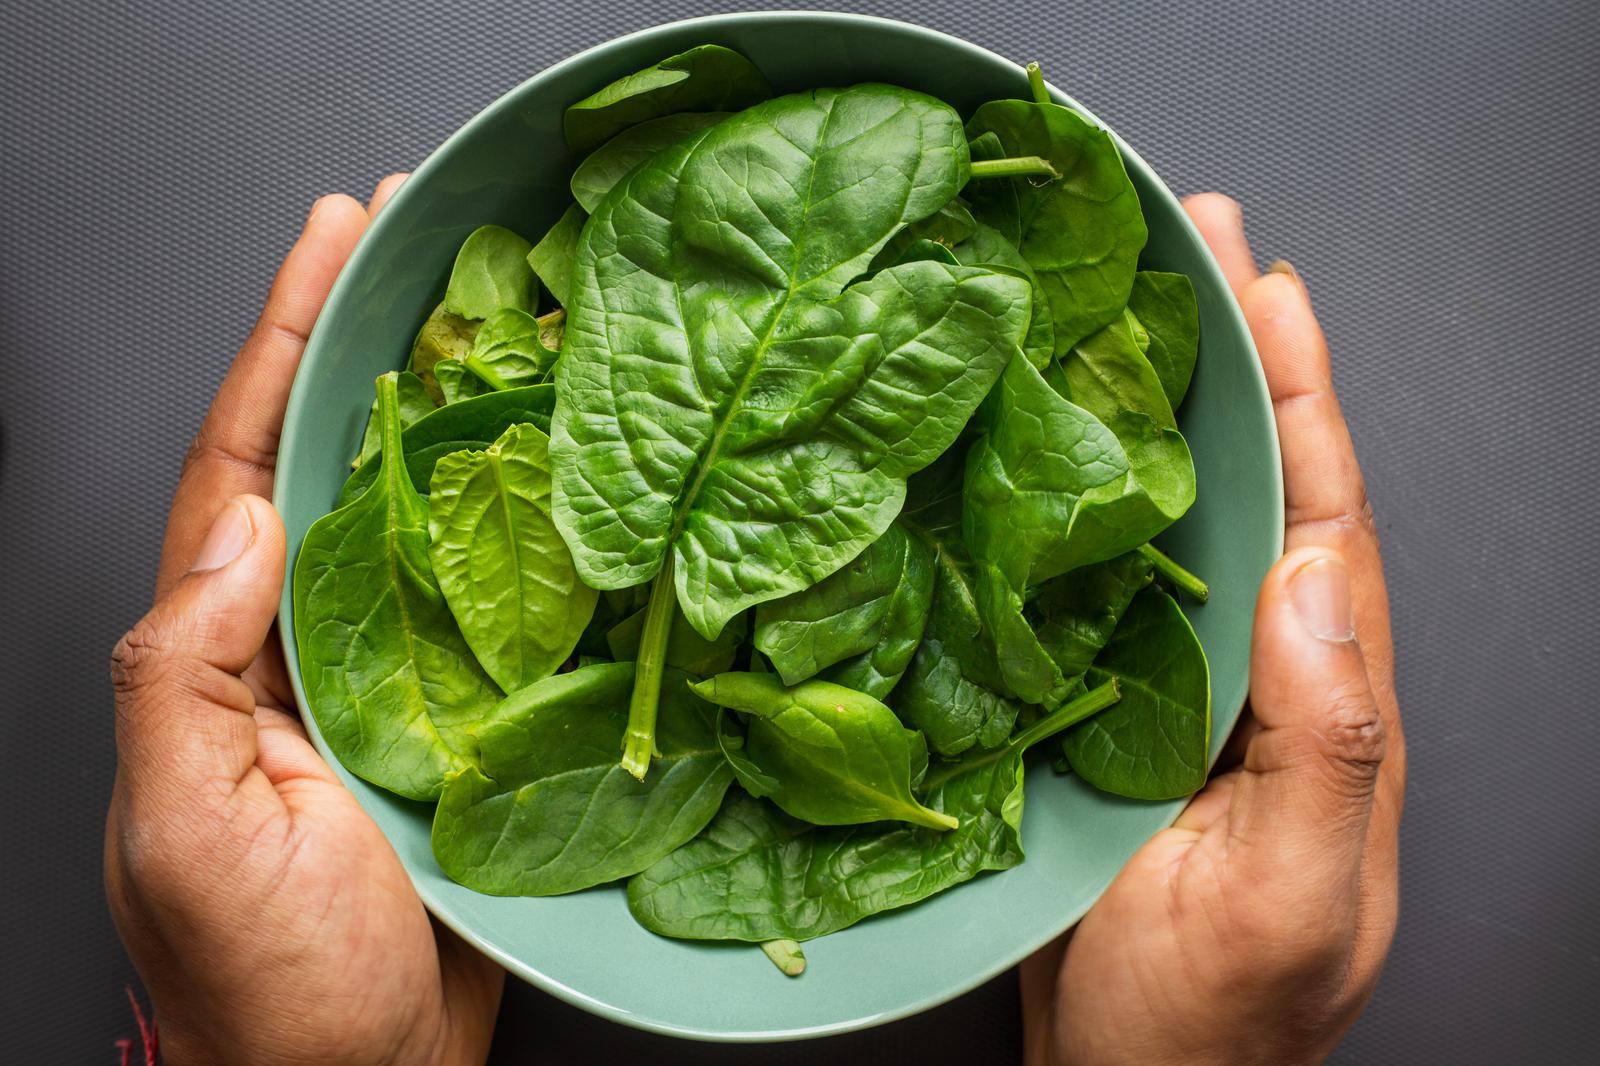 If You Want to Know How ❤️ Romantic You Are, Pick Some Unpopular Foods to Find Out Spinach